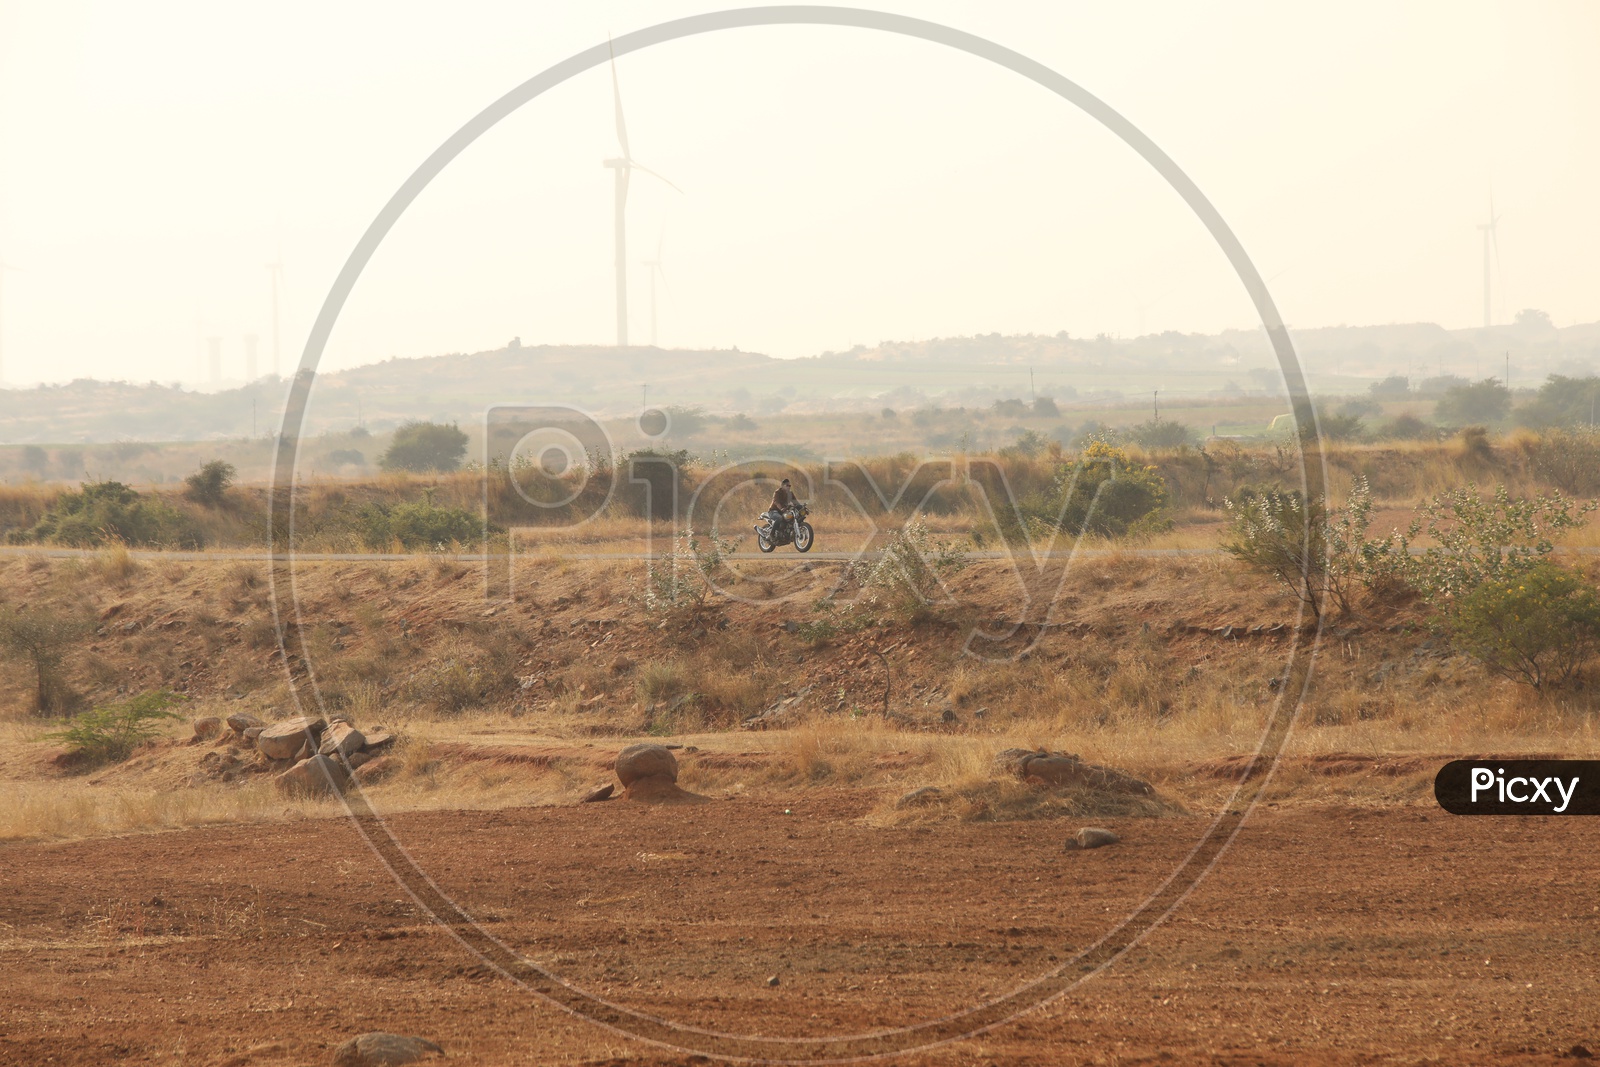 Dry steep grass and red mud on the roadside - Biker out of focus